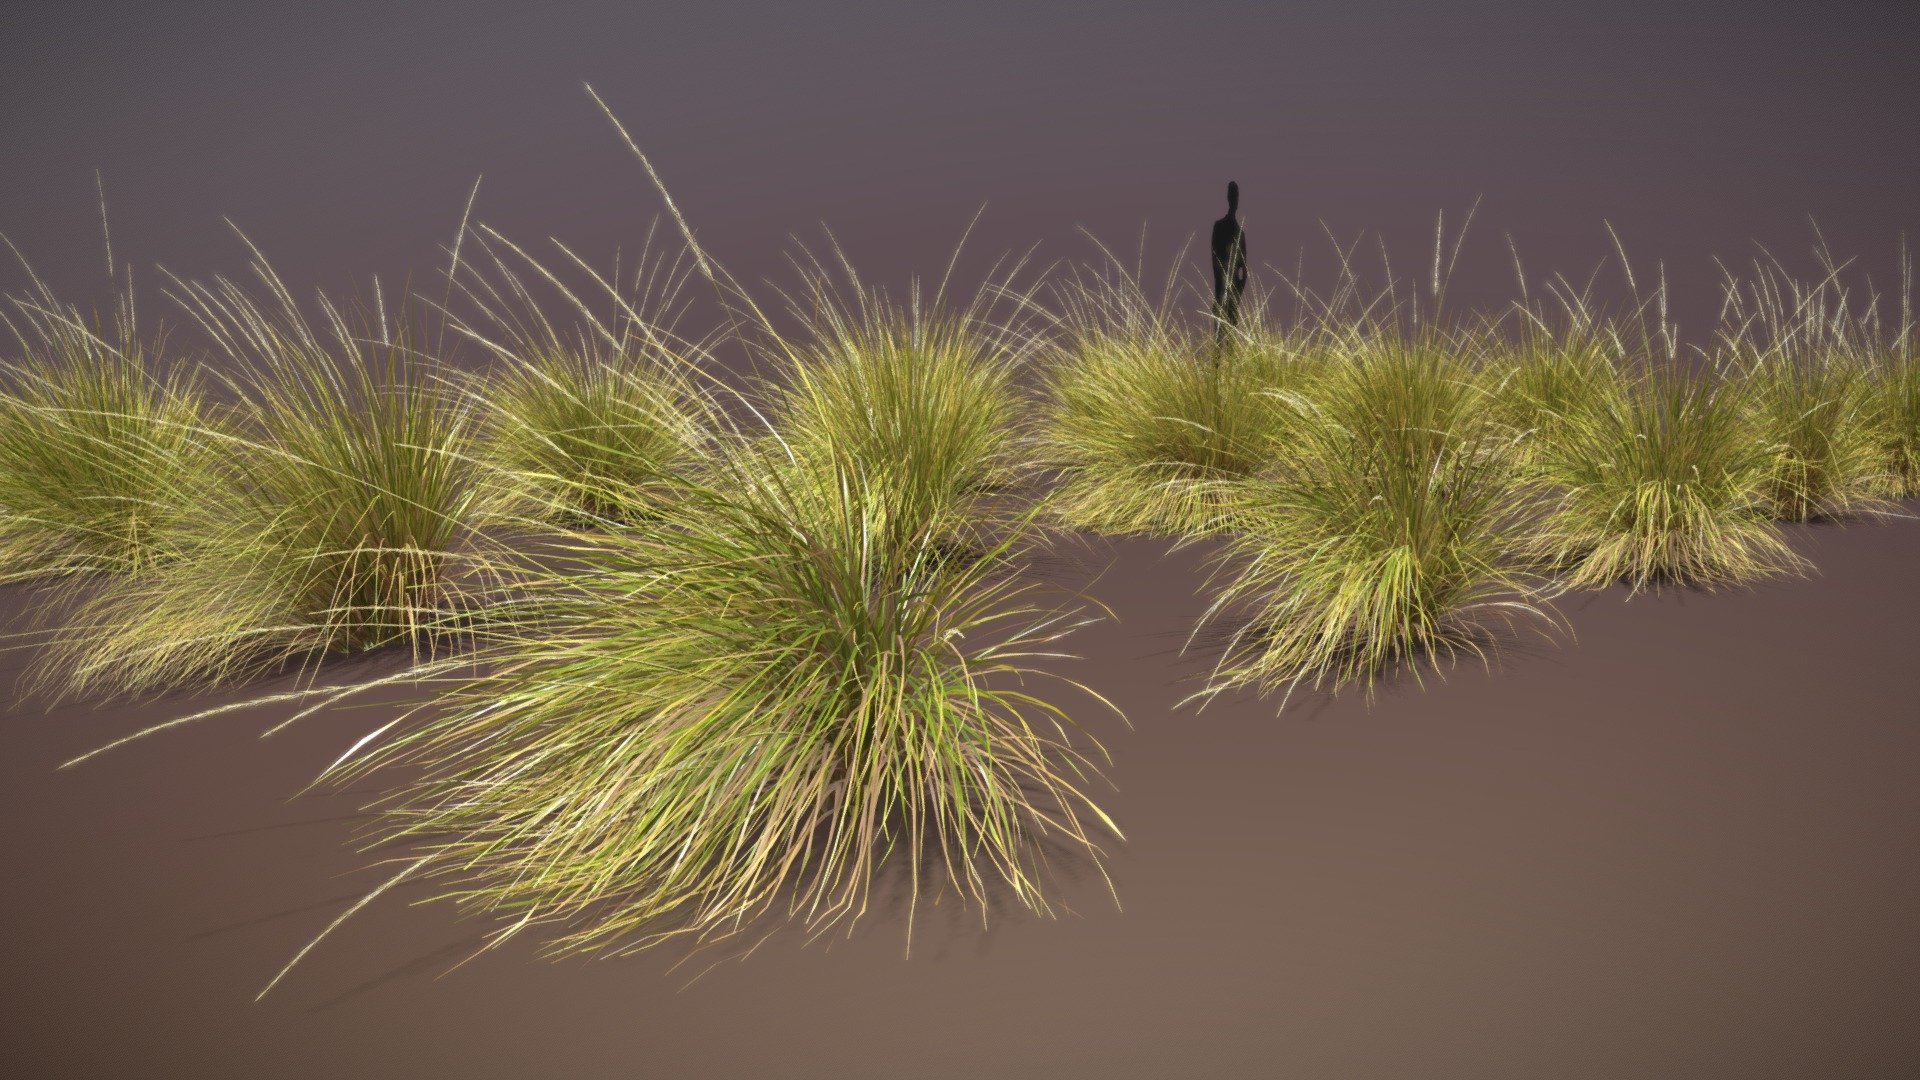 A set of 15 plants for exterior archviz, for someone, who needs highly detailed models, with geometry based on mesh instead of alpha maps.

Model created in Blender 3.0, with basic tools so it woorks with previous versions. Checked with latest stabile wersion of 2.83.


based on Festuca Mairei in autumn vegetation state

UV-unwrapped

mesh based on quads

custom, baked textures

File organized for use with particle system and for linking objects - it contains colection with all 15 pieces, and individual collection for every plant (for linking)

additional formats: fbx, obj, dae

native Blender file, and textures in other formats folder
 - Festuca Mairei ornamental grass (15 plants) - Buy Royalty Free 3D model by marcin_malcherek 3d model